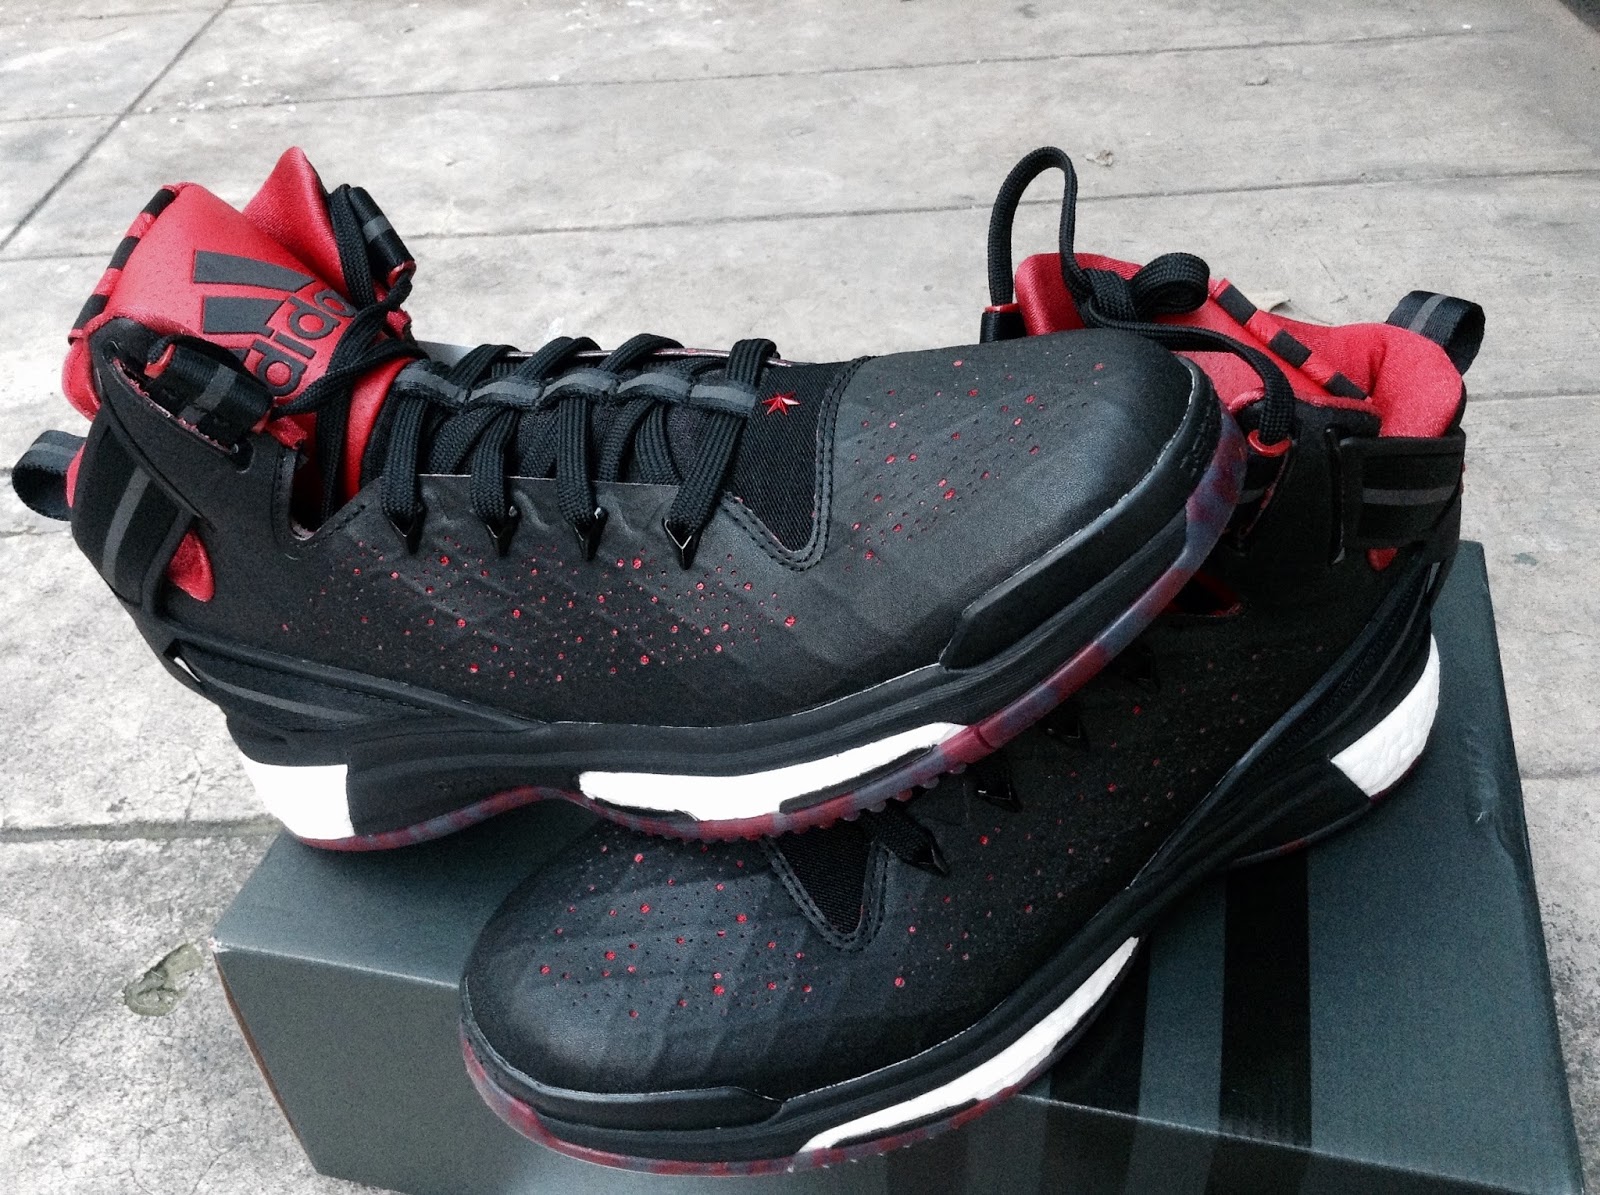 Bleachers Brew: Check out my new D Rose 6 kicks from adidas!